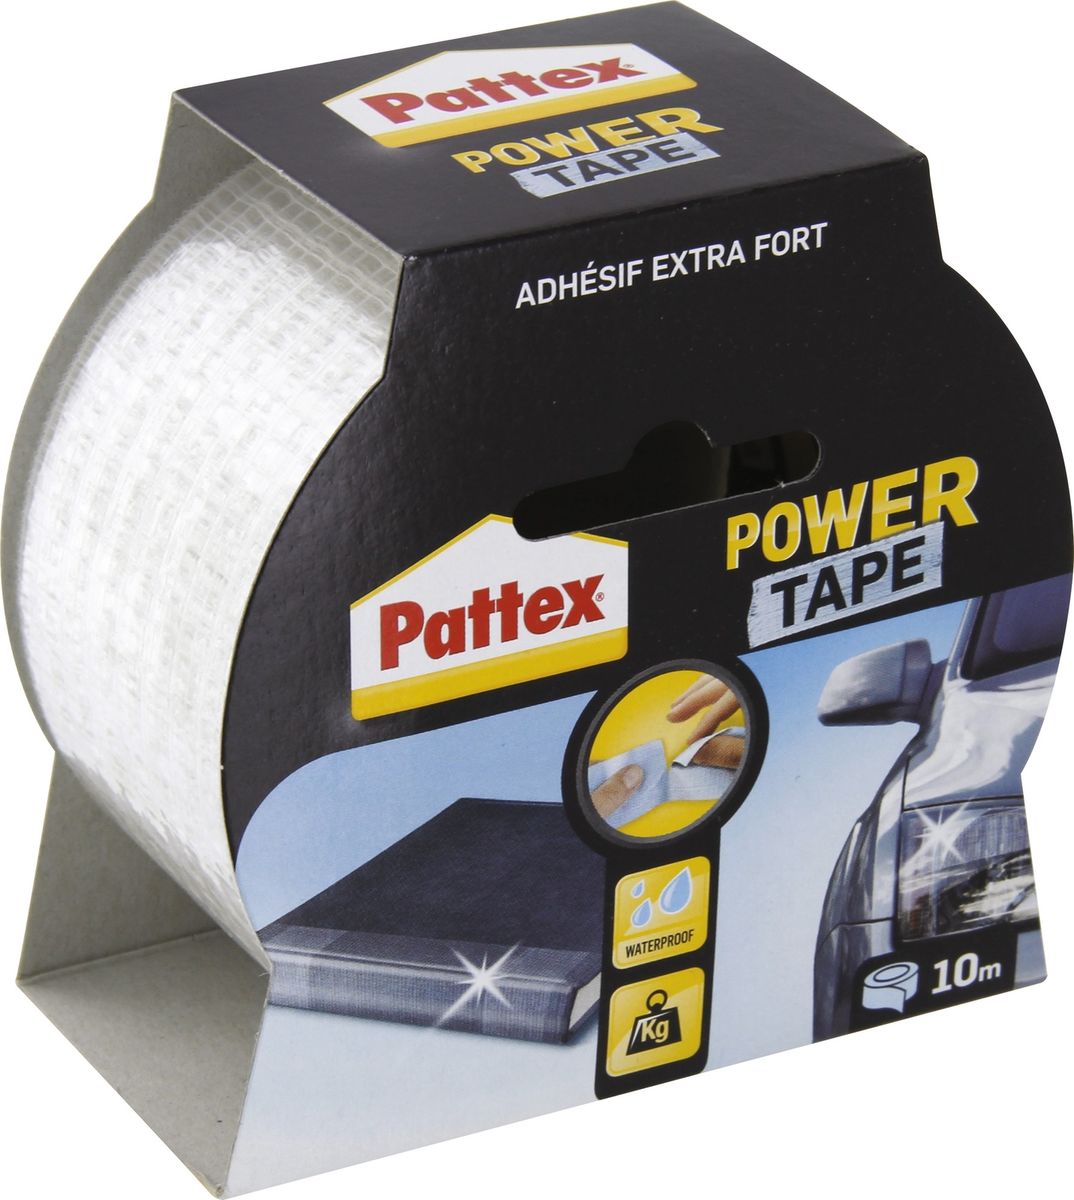 Adhesif super puissant power tape vg incolore 10 x 50